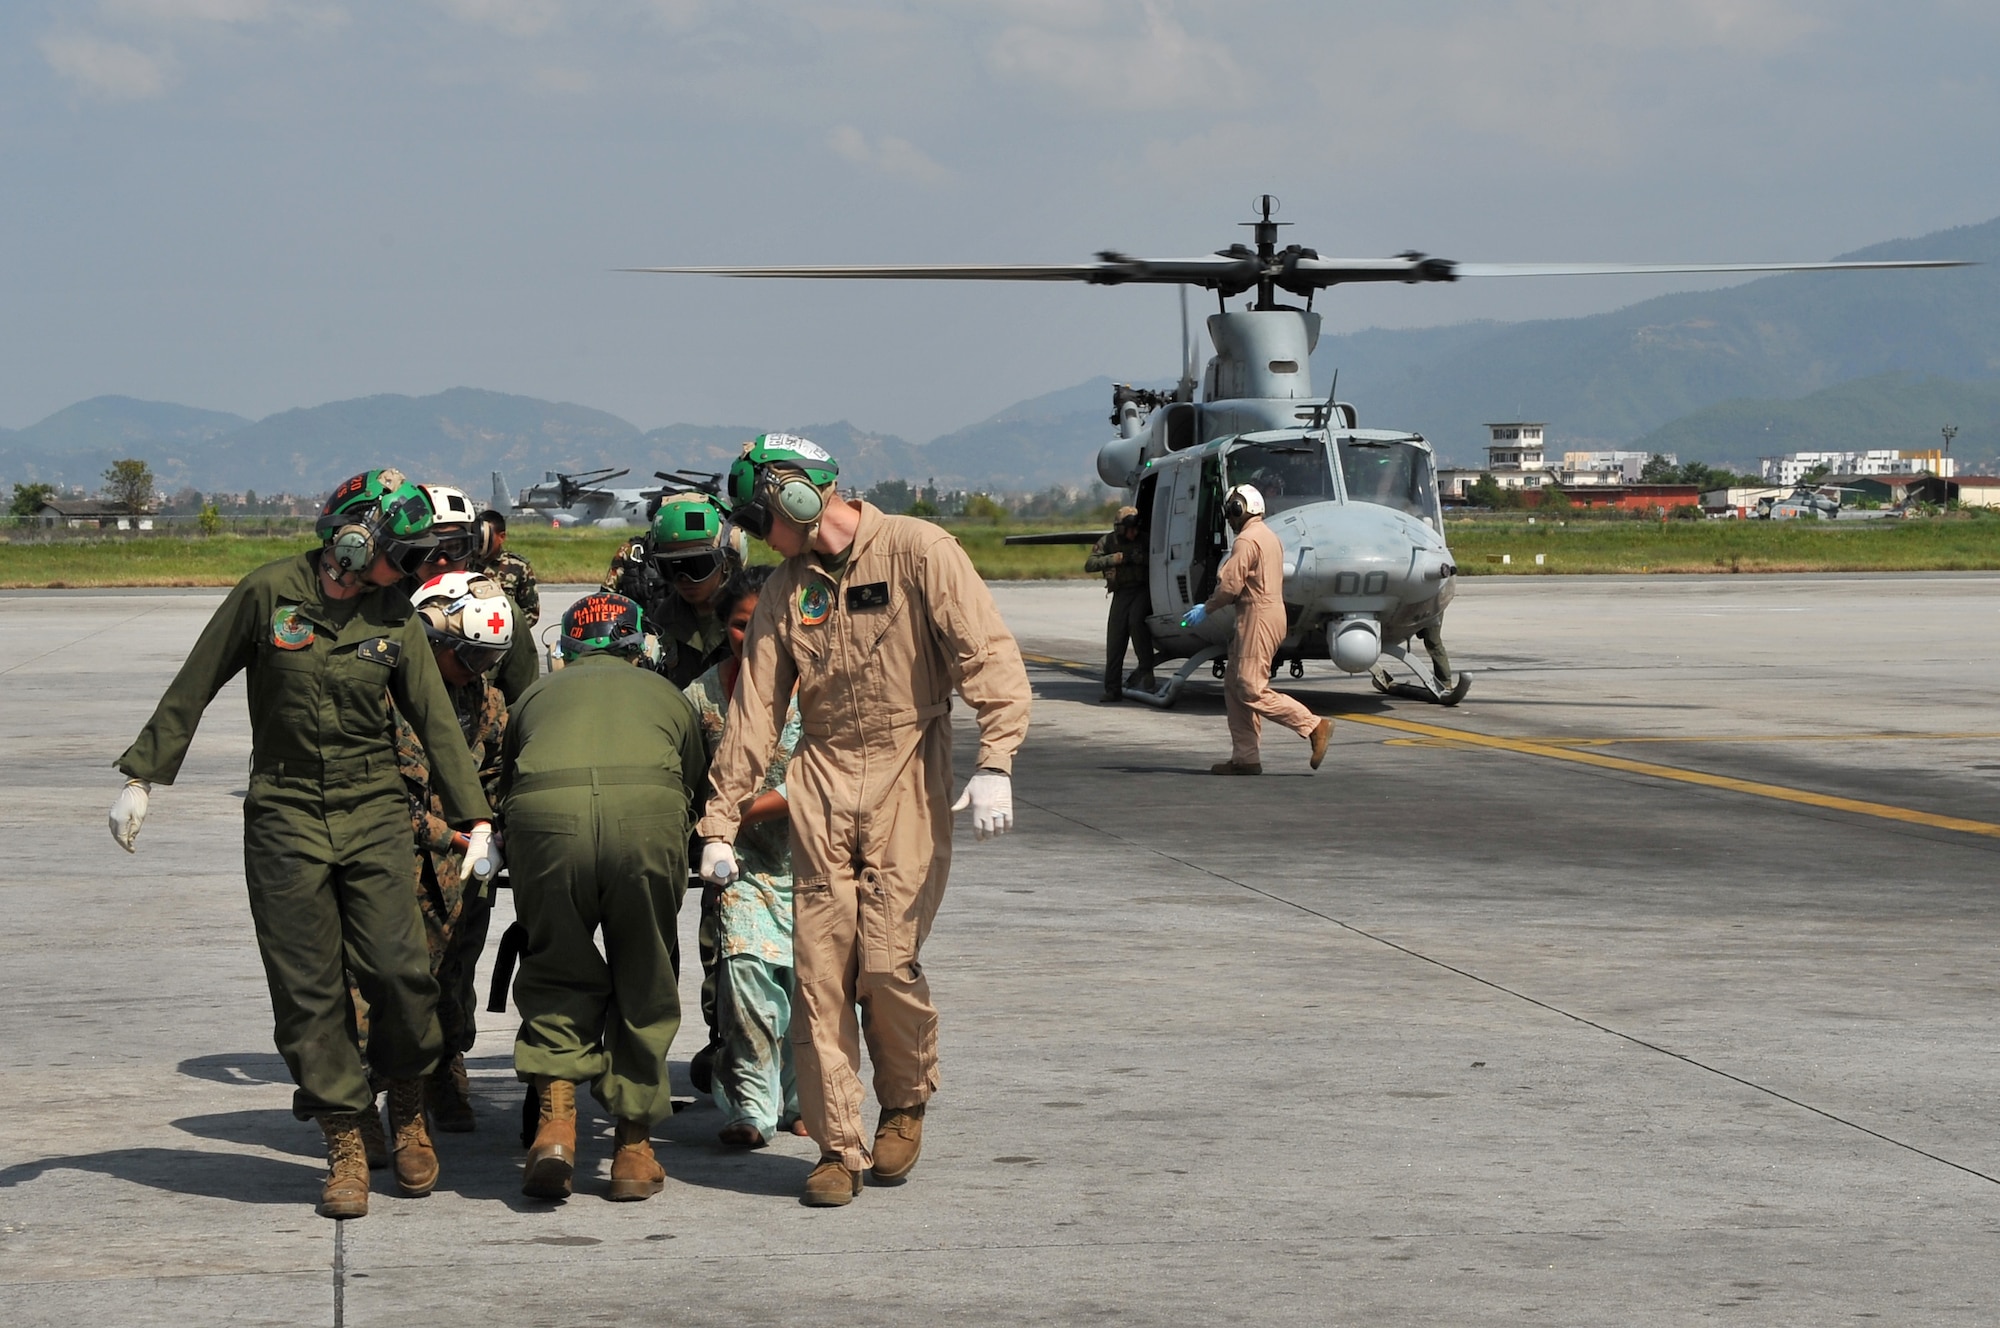 U.S. Marines and Nepalese army soldiers transport an earthquake victim from a UH-1 Huey helicopter for medical care at the Tribhuvan International Airport in Kathmandu, Nepal, May 12, 2015. Joint Task Force-505 members worked with the Nepalese army to triage, treat and transport patients after a 7.3 magnitude earthquake struck the same day following a 7.8 magnitude earthquake that devastated the nation April 25, 2015. (U.S. Air Force photo by Staff Sgt. Melissa B. White/Released)